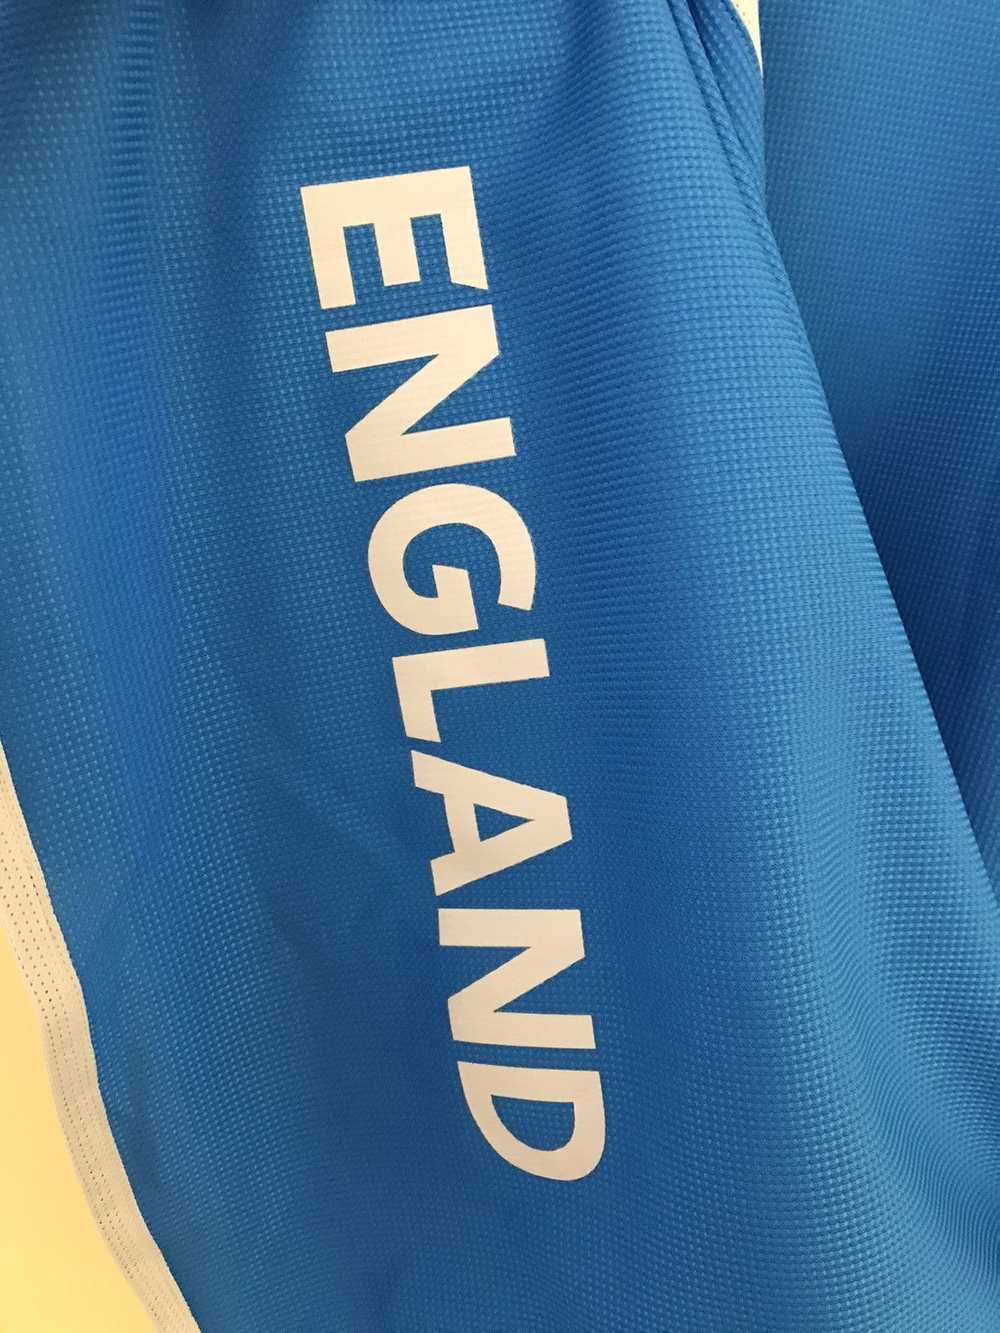 Fifa World Cup × Soccer Jersey × Umbro England 20… - image 5